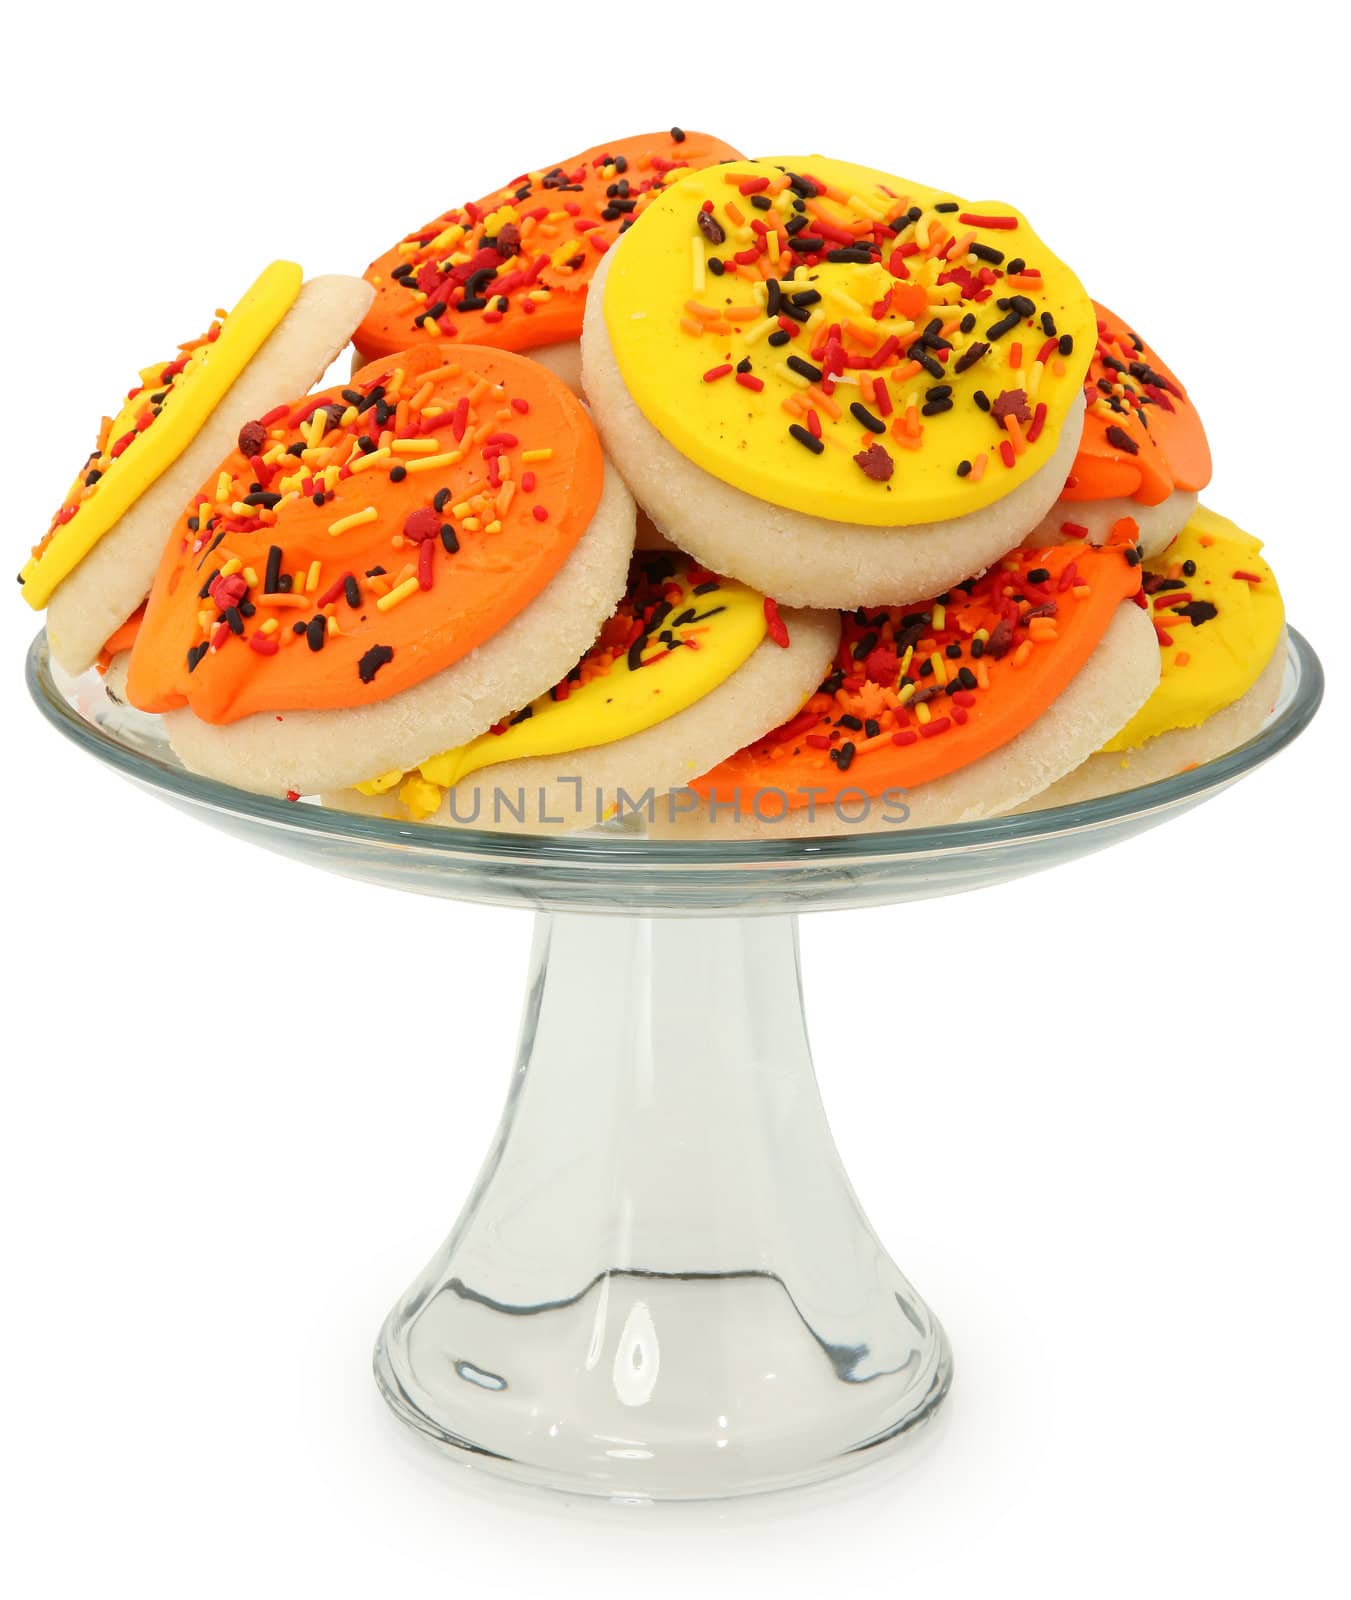 Fall Themed Sugar Cookies Stacked on Platter by duplass